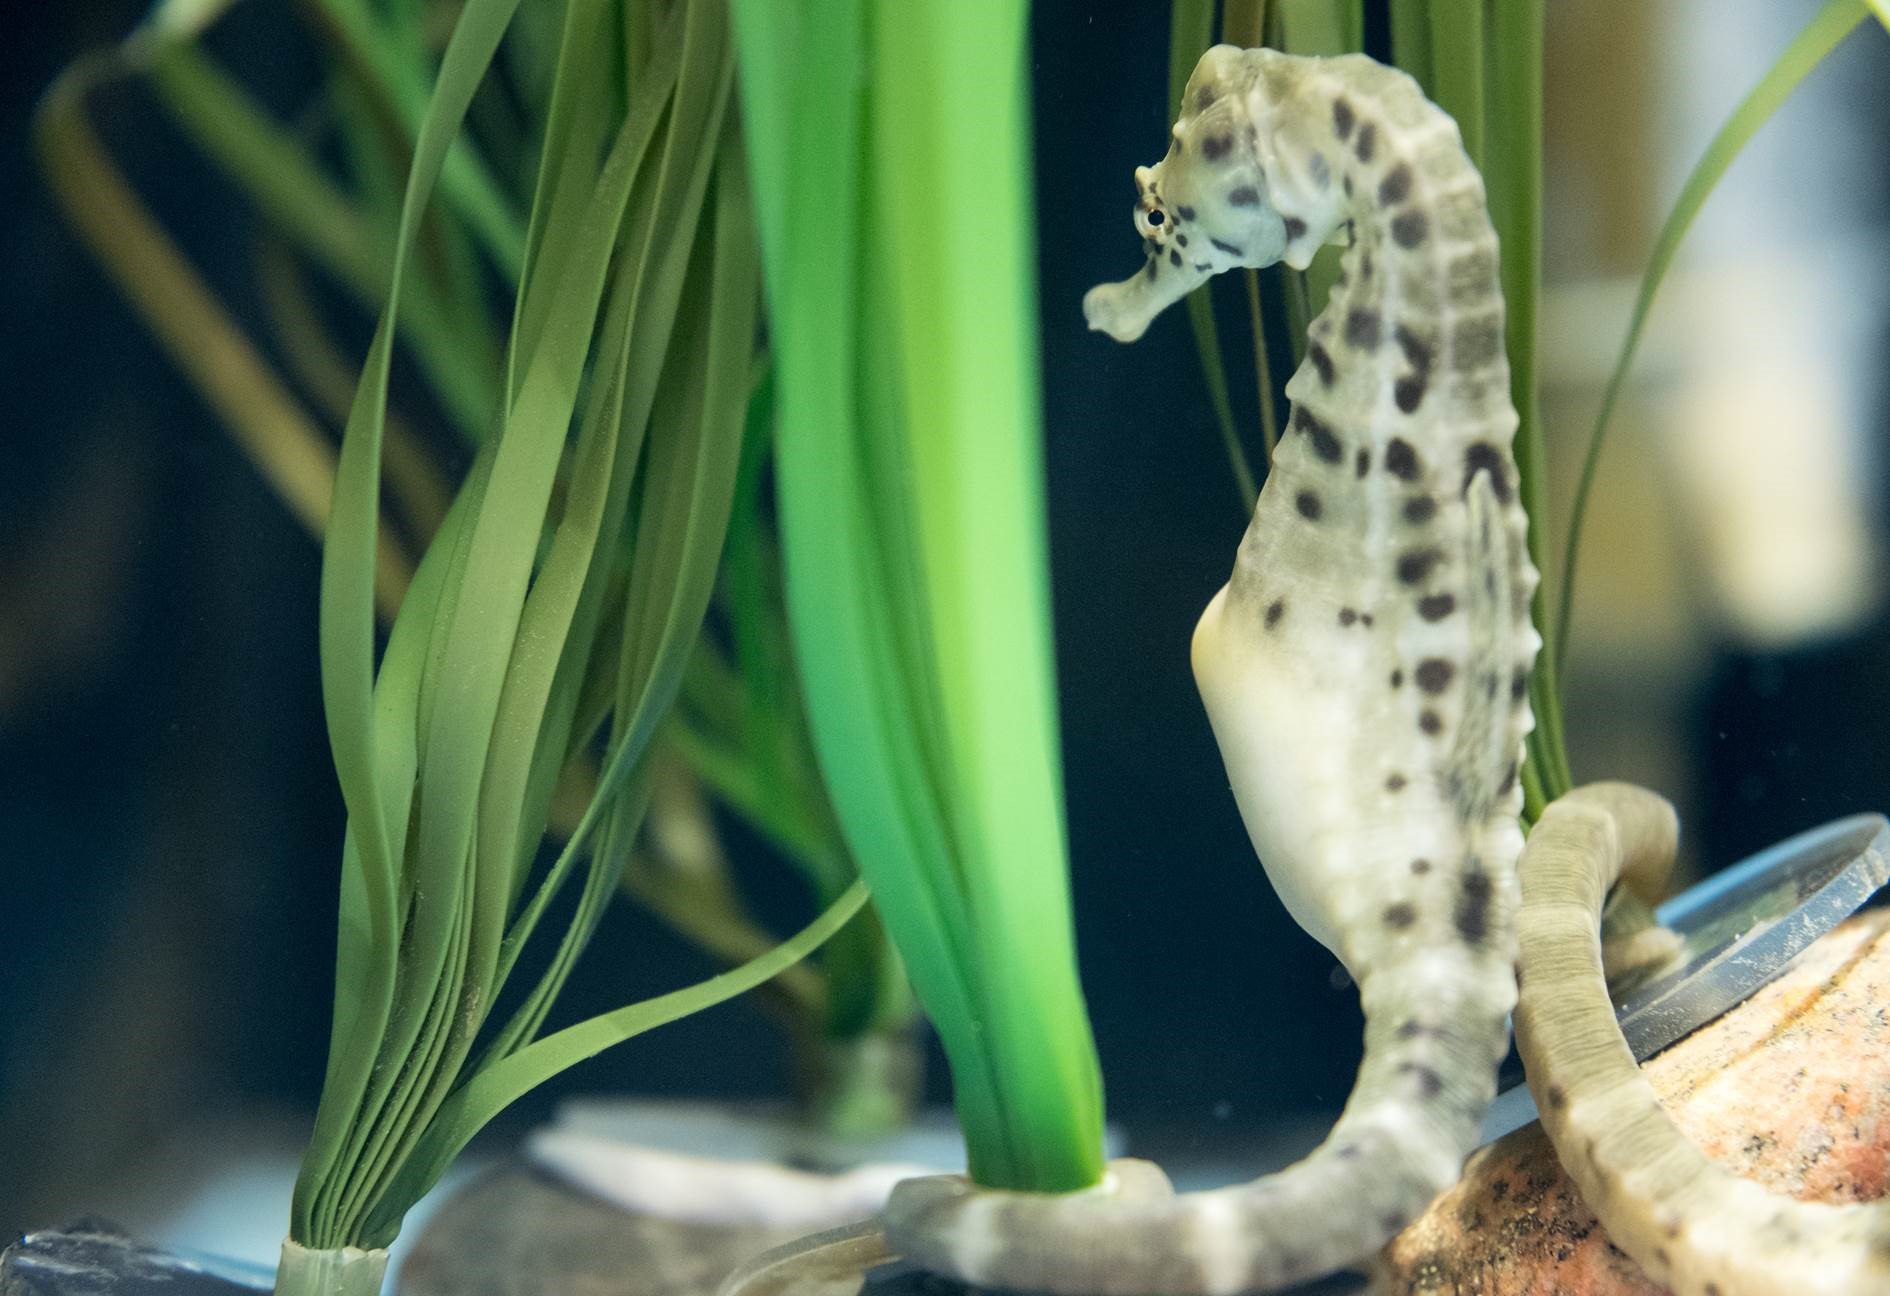 While this male seahorse is not pregnant, when one is, it's hardly noticeable, according to Dr. Roth. Image credit - Sarah Kaehlert